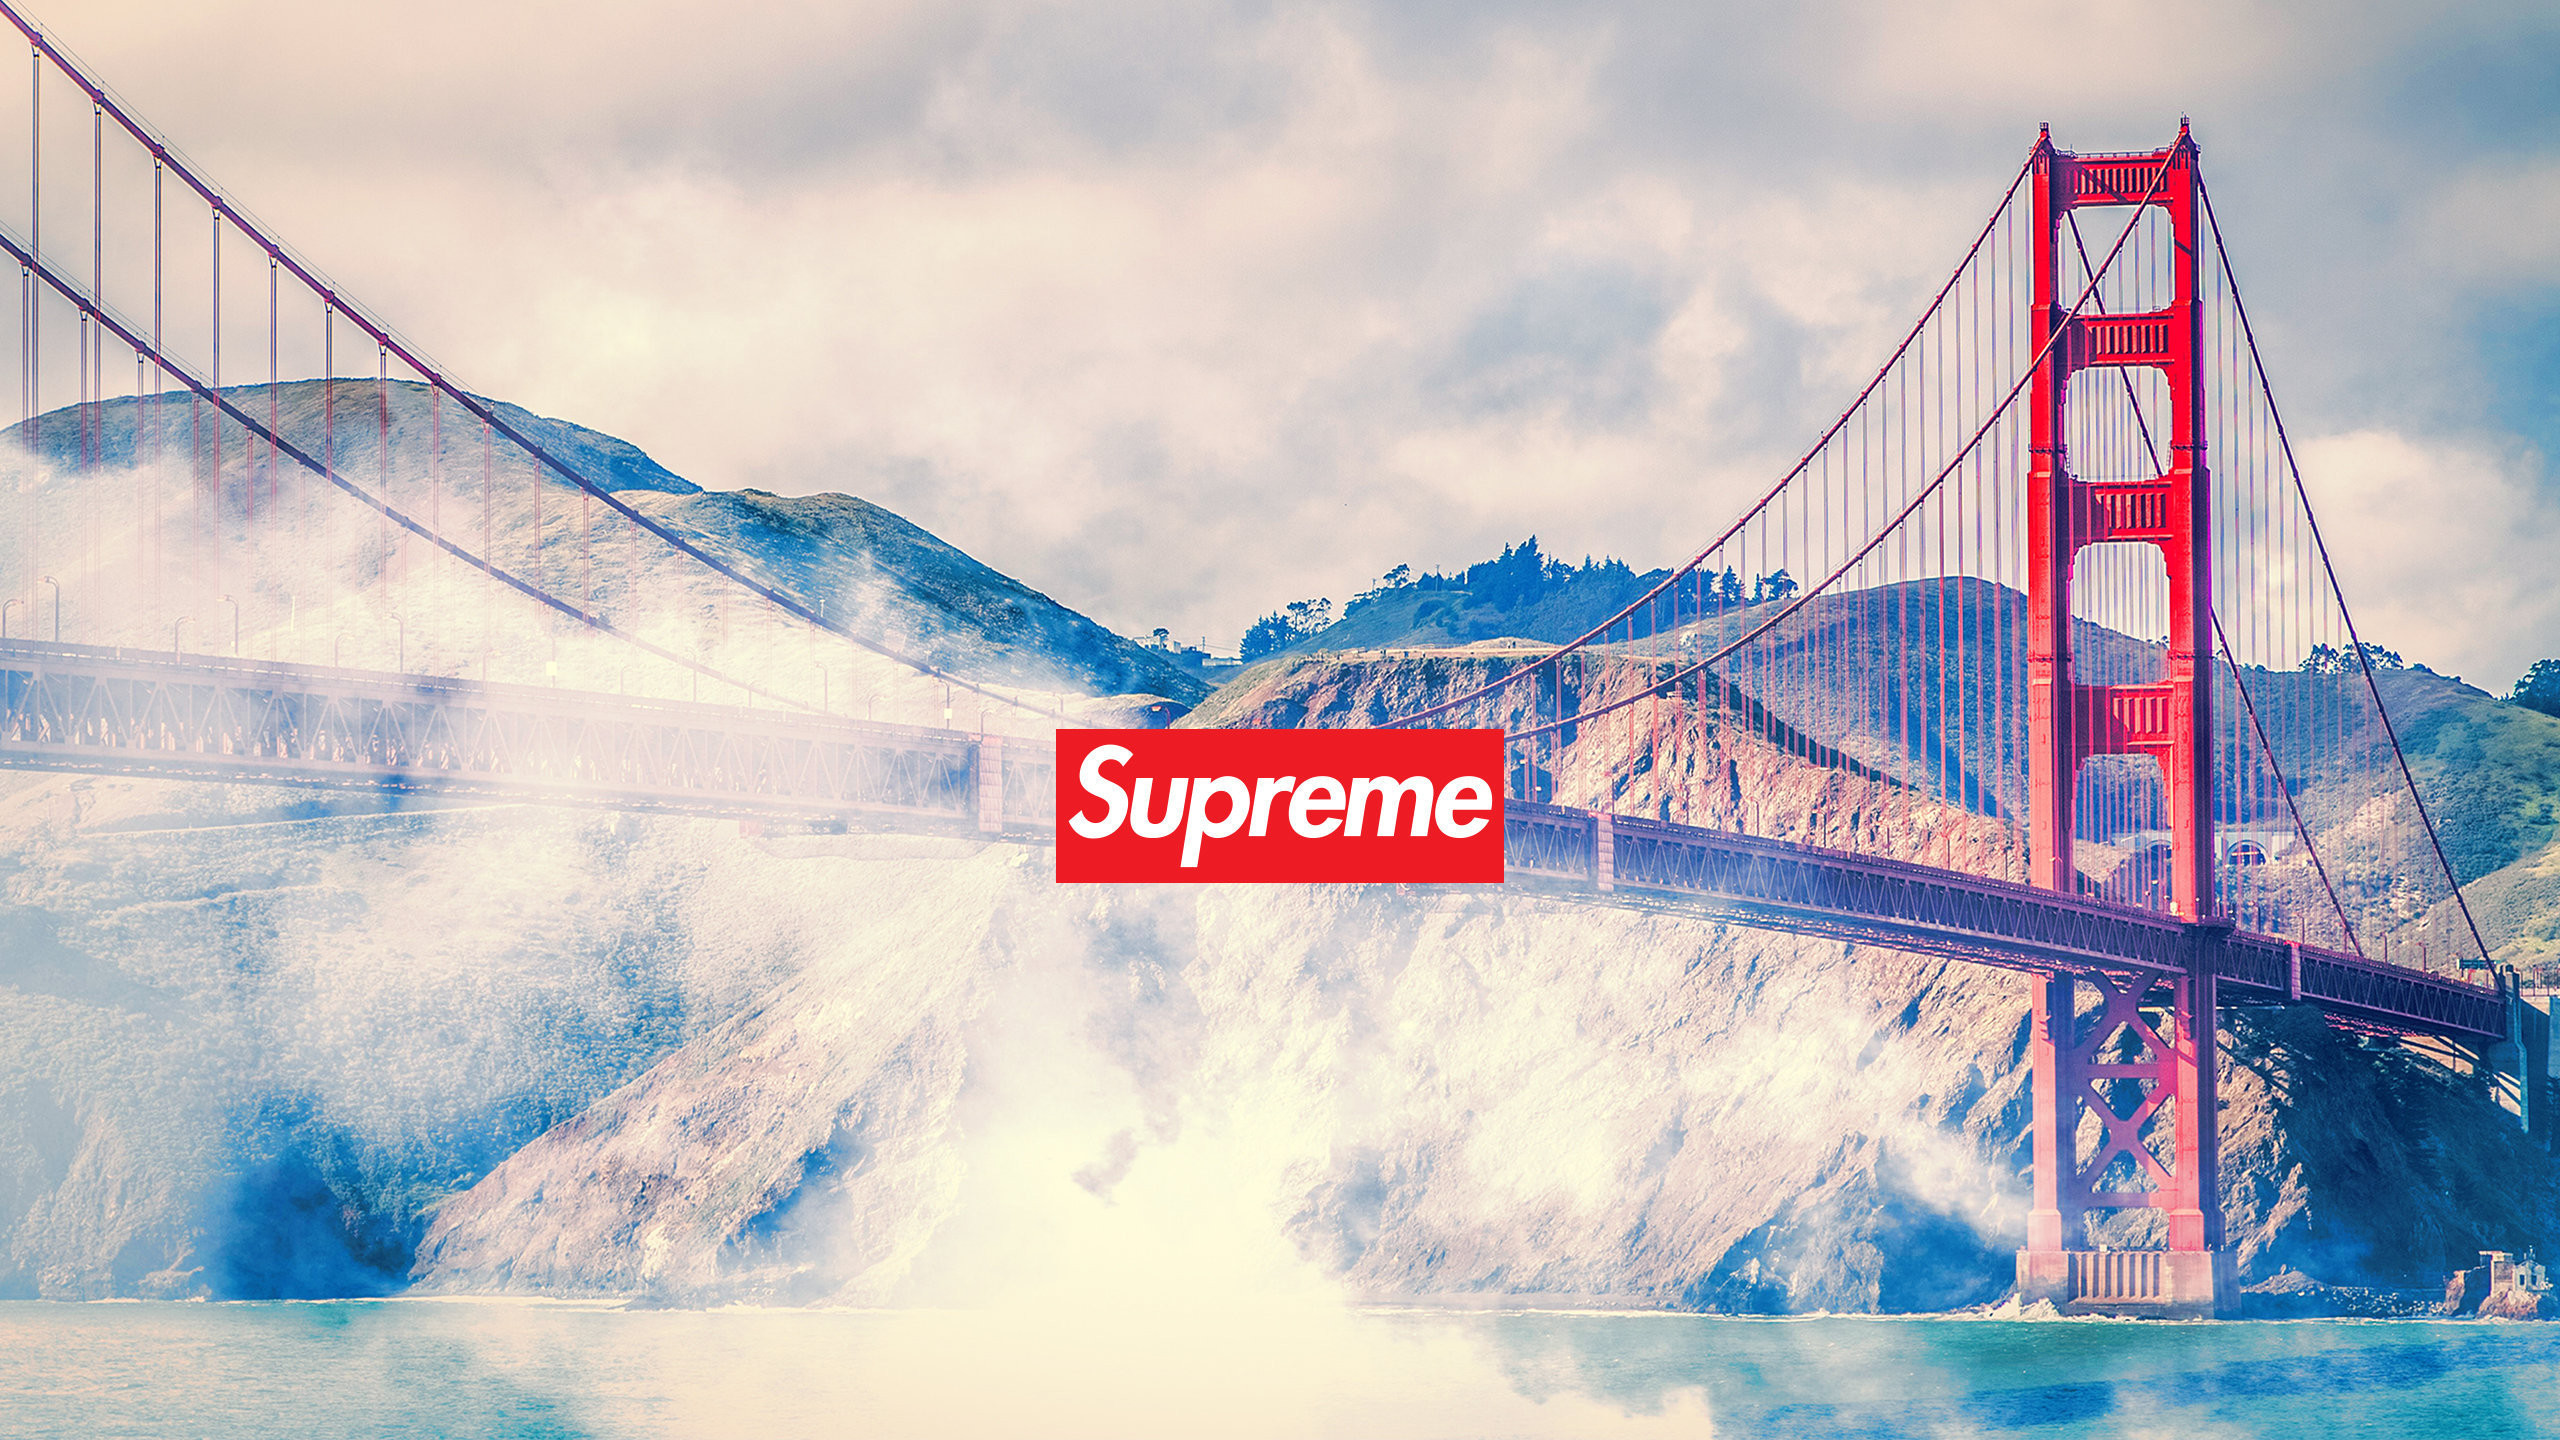 Supreme Wallpaper The Best Image In